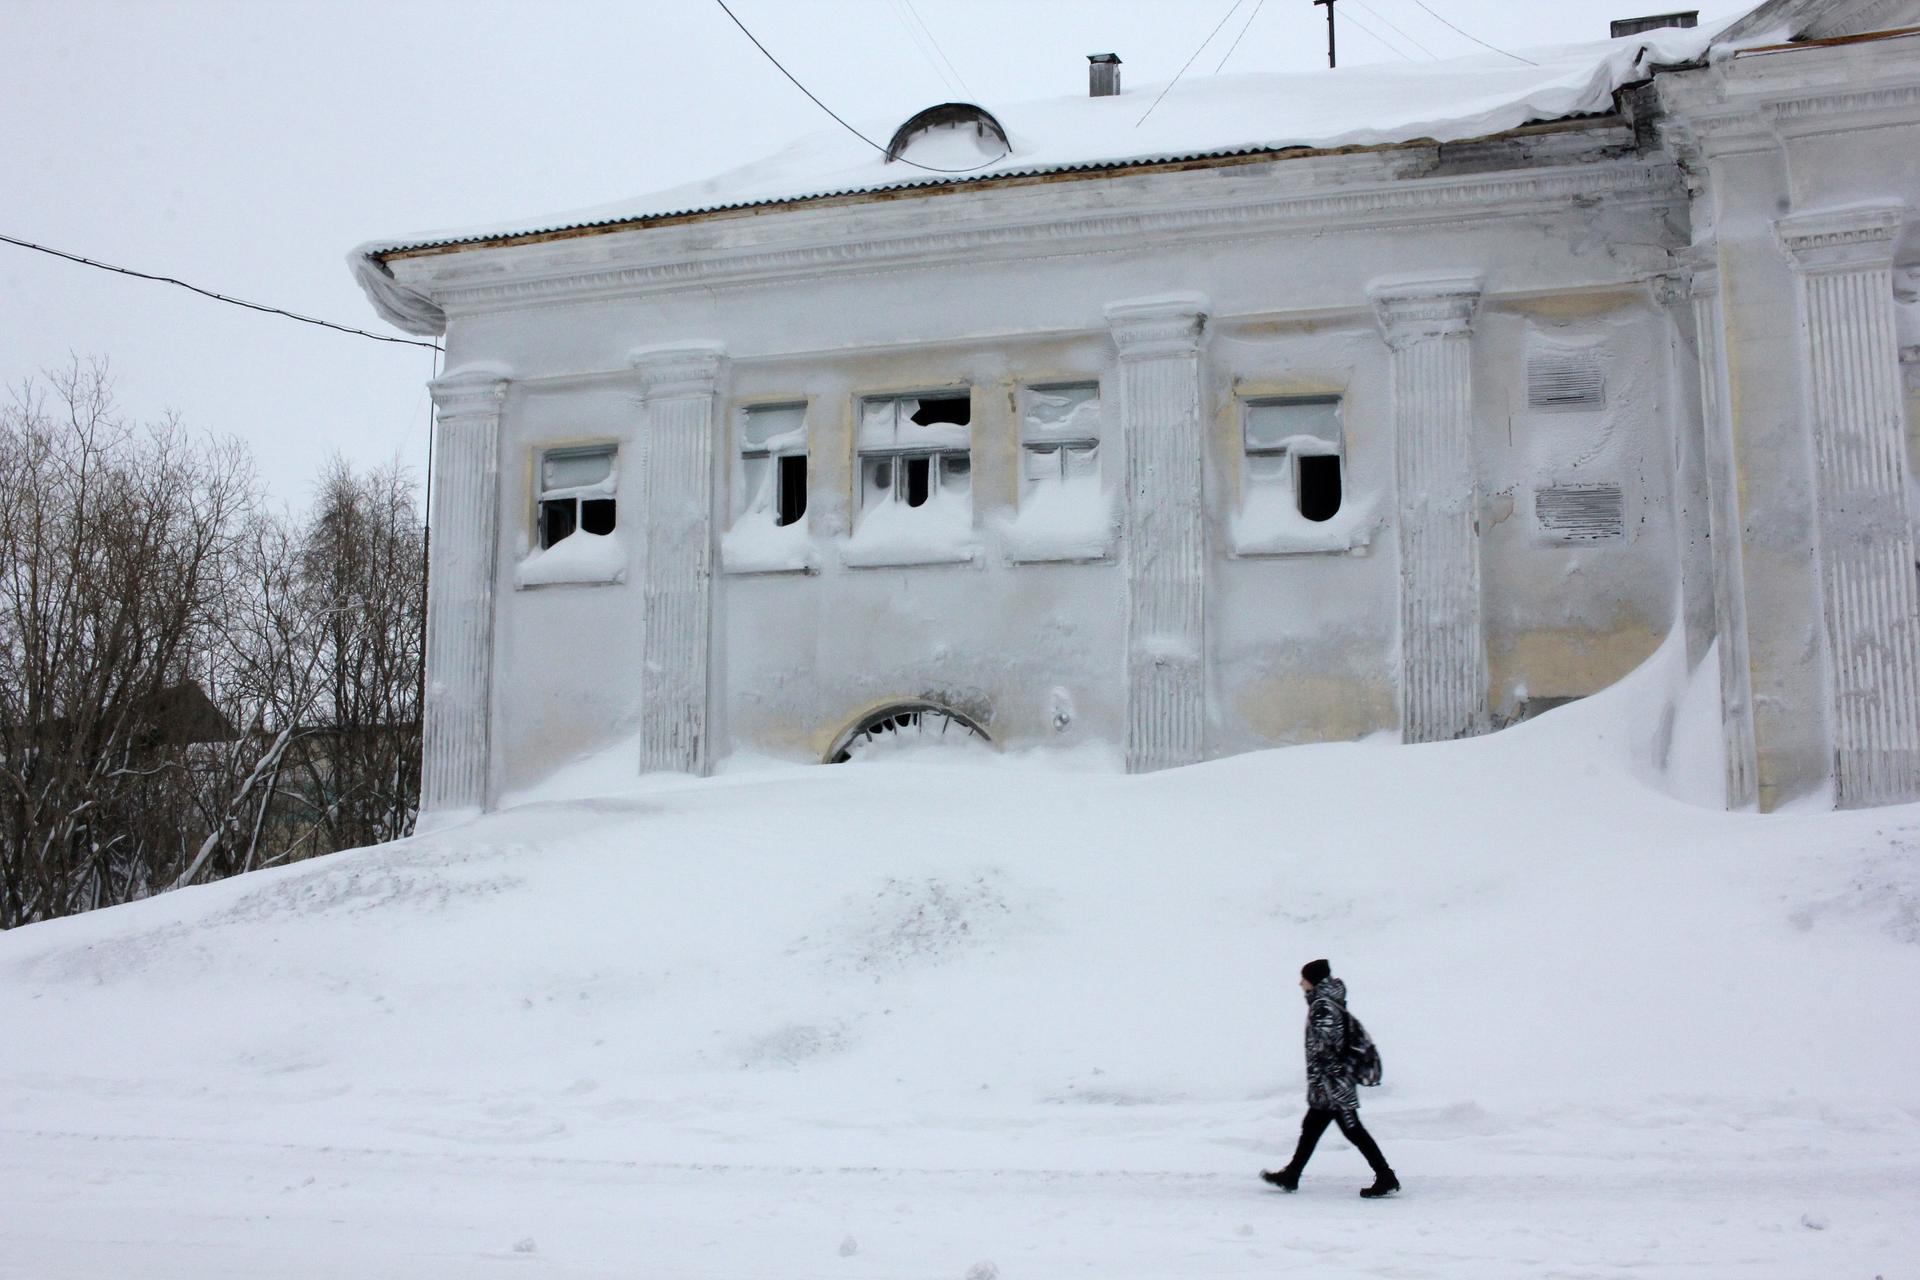 A man walks past an abandoned building in the snow